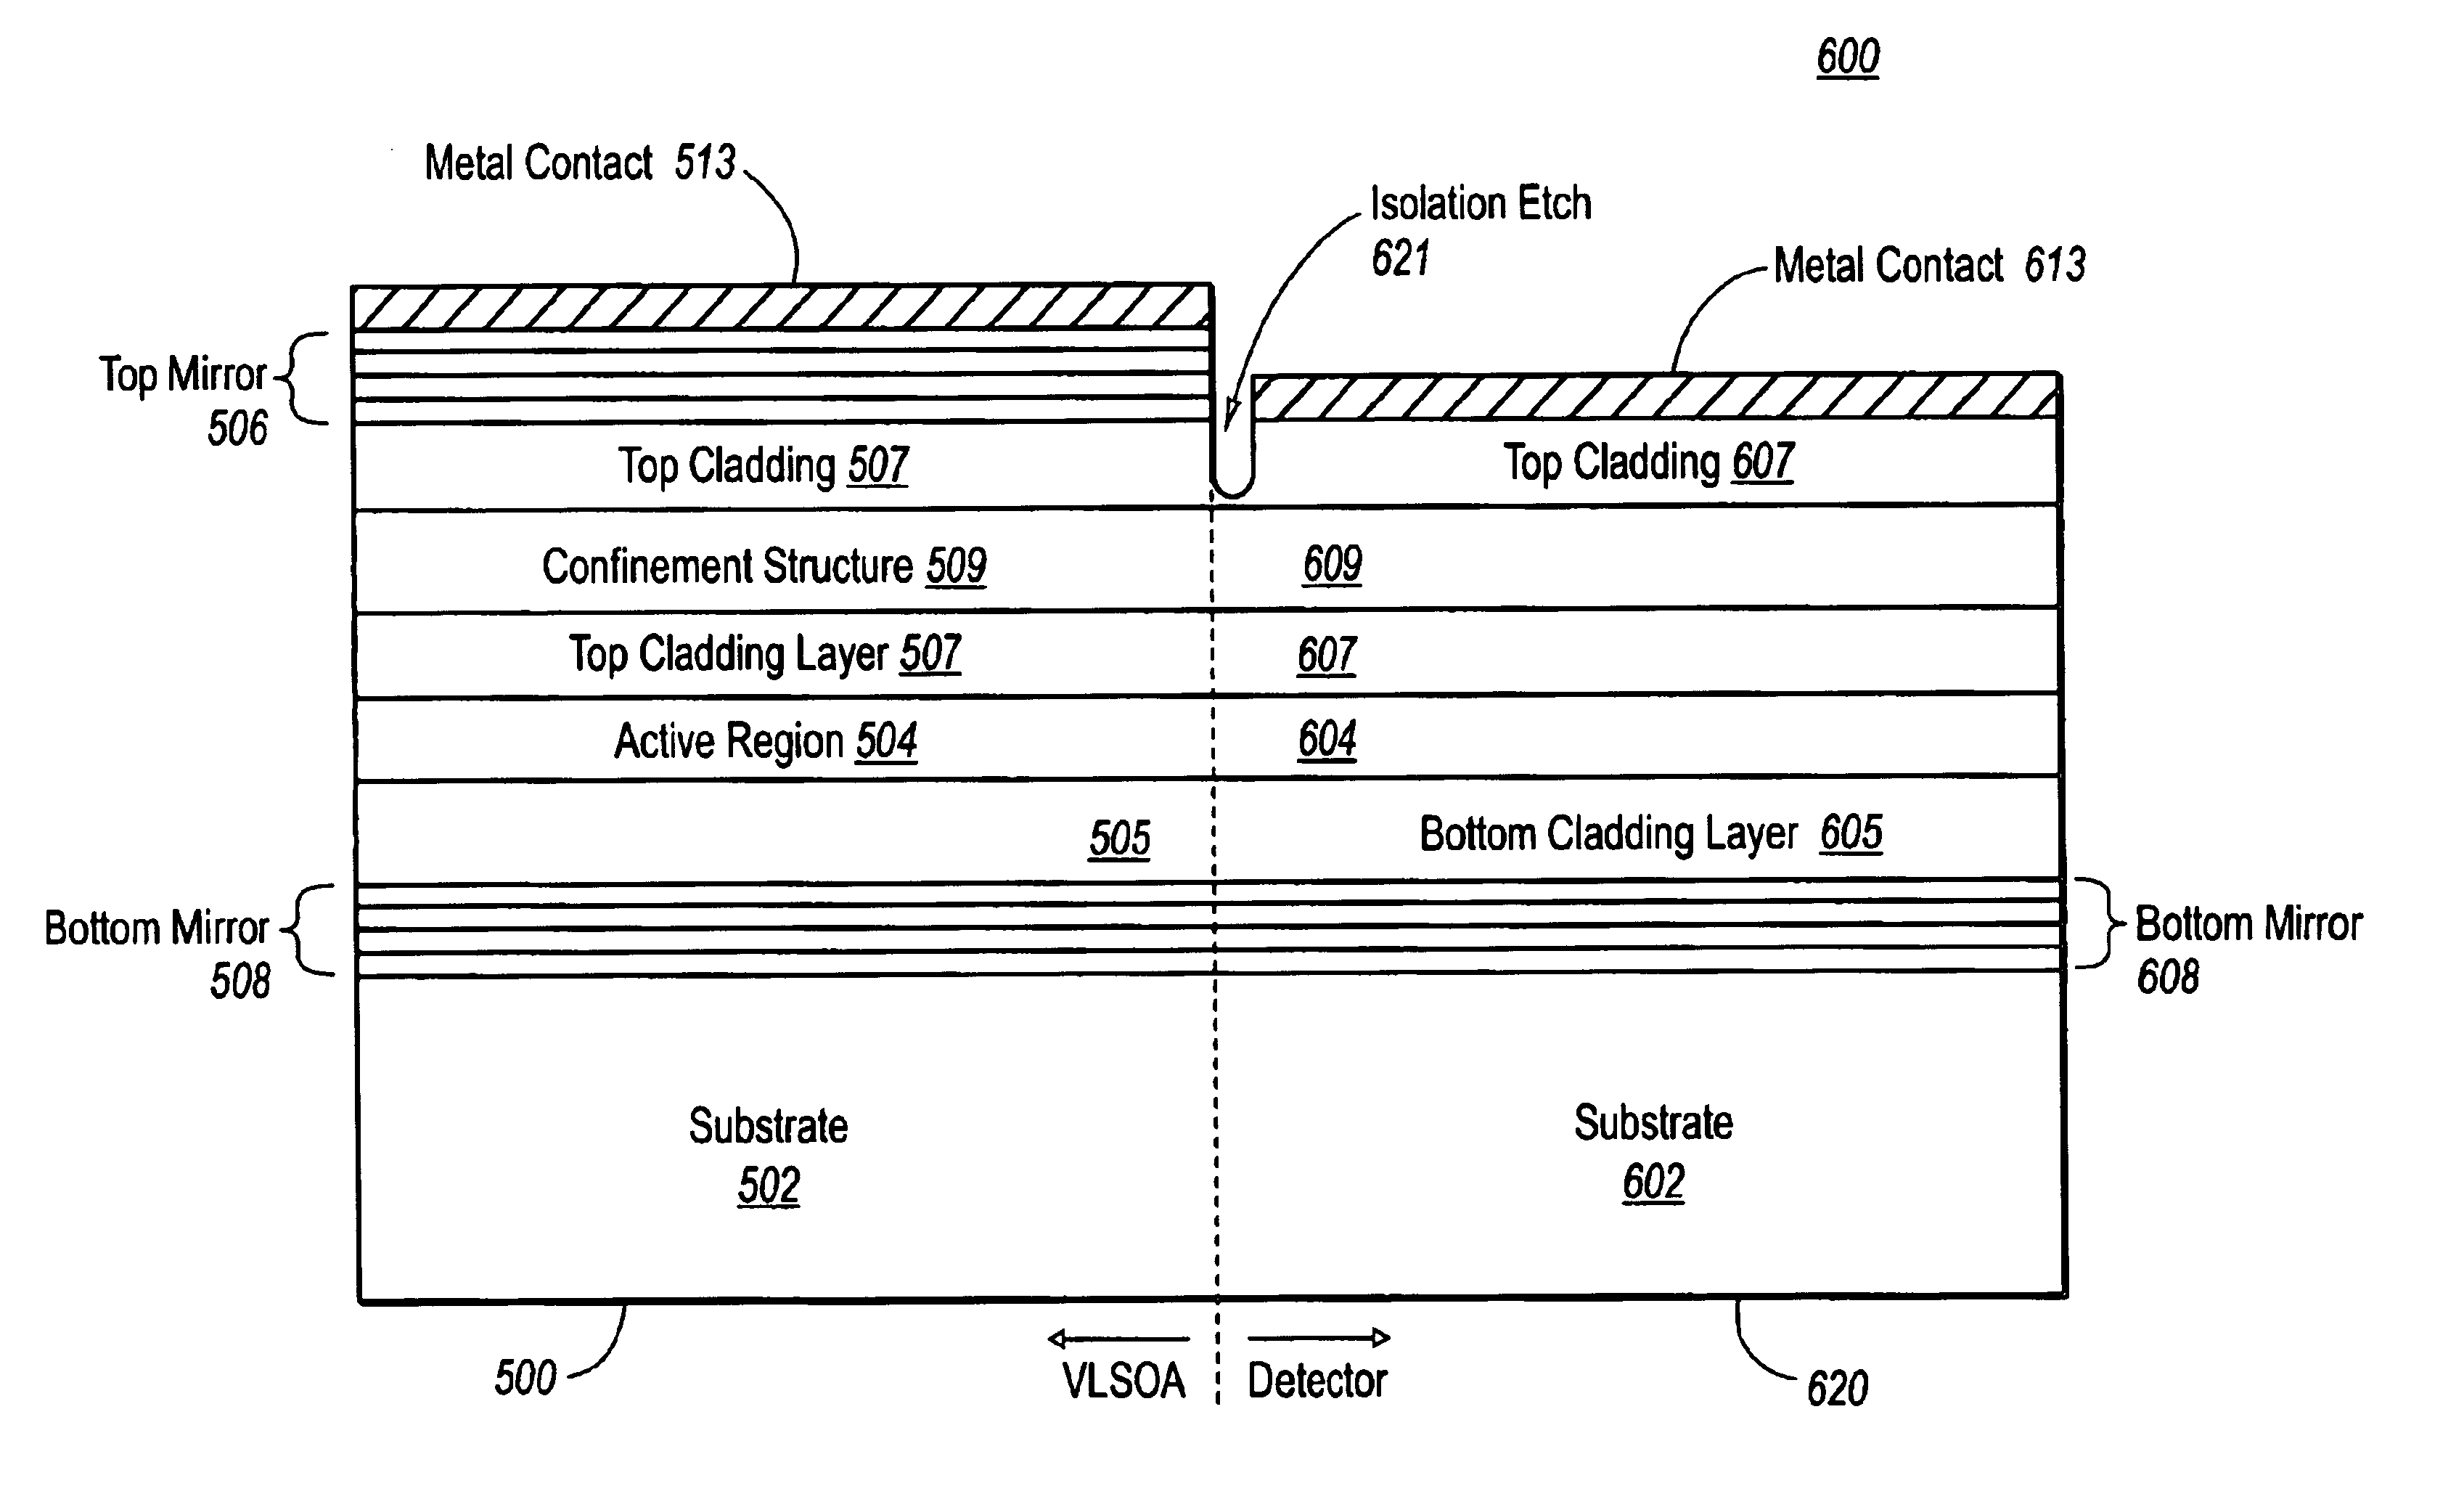 Optical receiver including a linear semiconductor optical amplifier